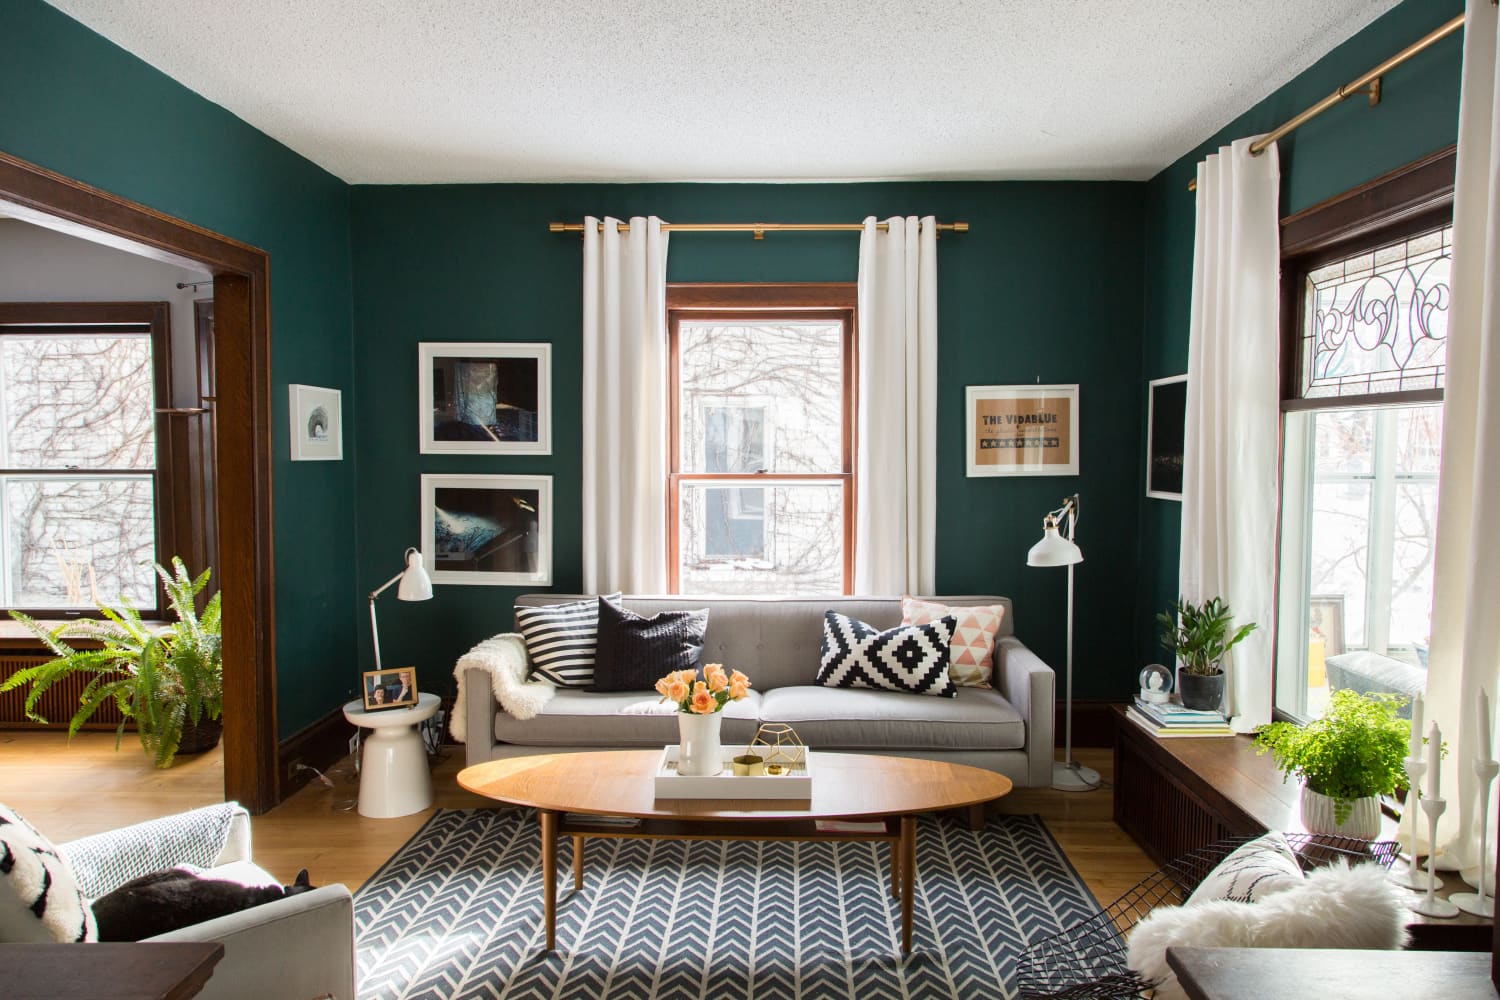 Green Room Ideas: 15 Pretty Ways To Use Green In Your Rooms